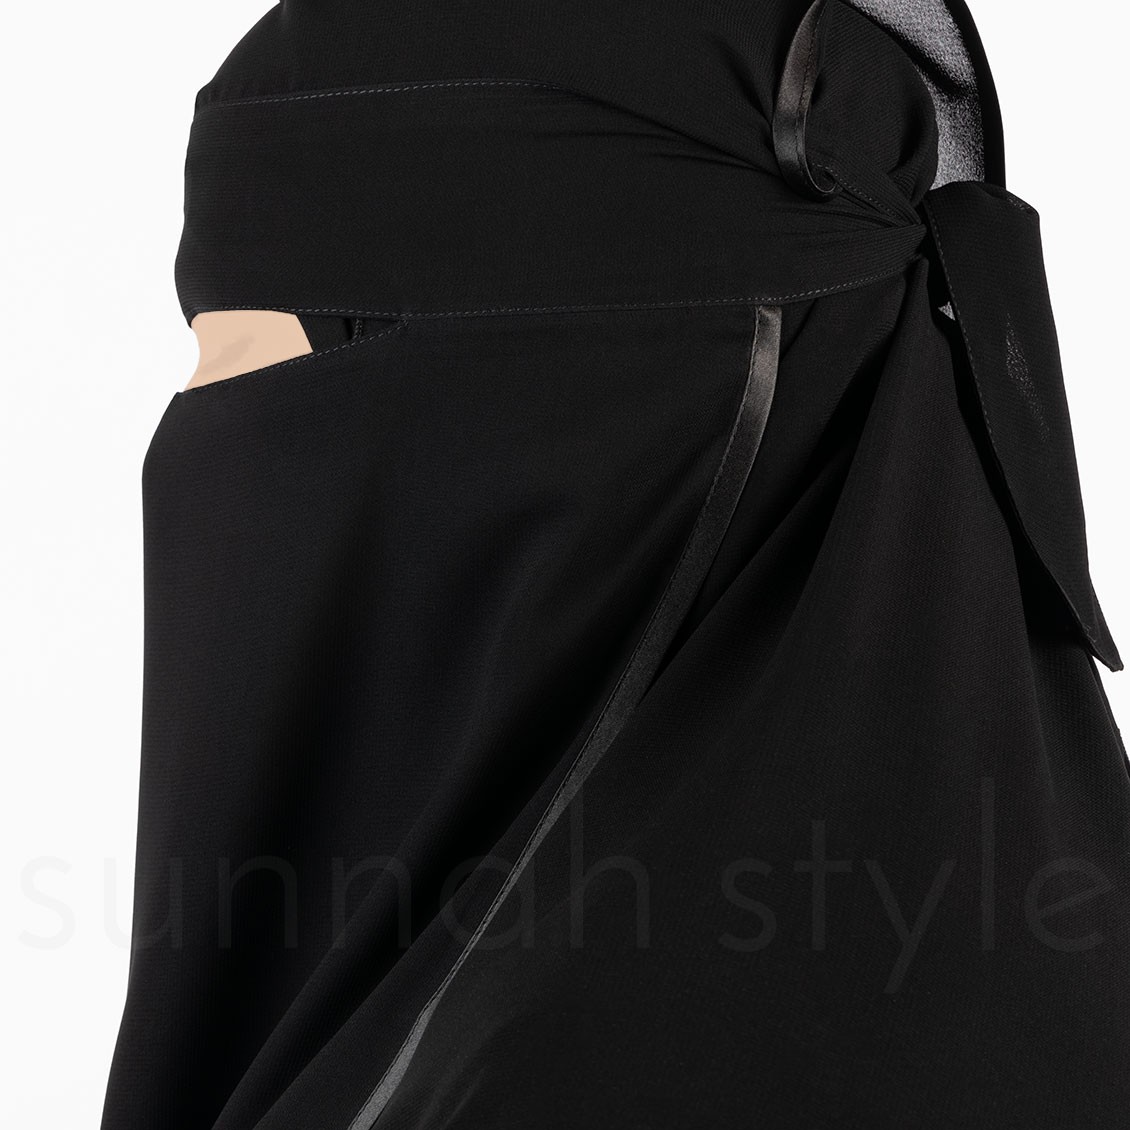 Sunnah Style Satin Trimmed Two Layer Niqab Black